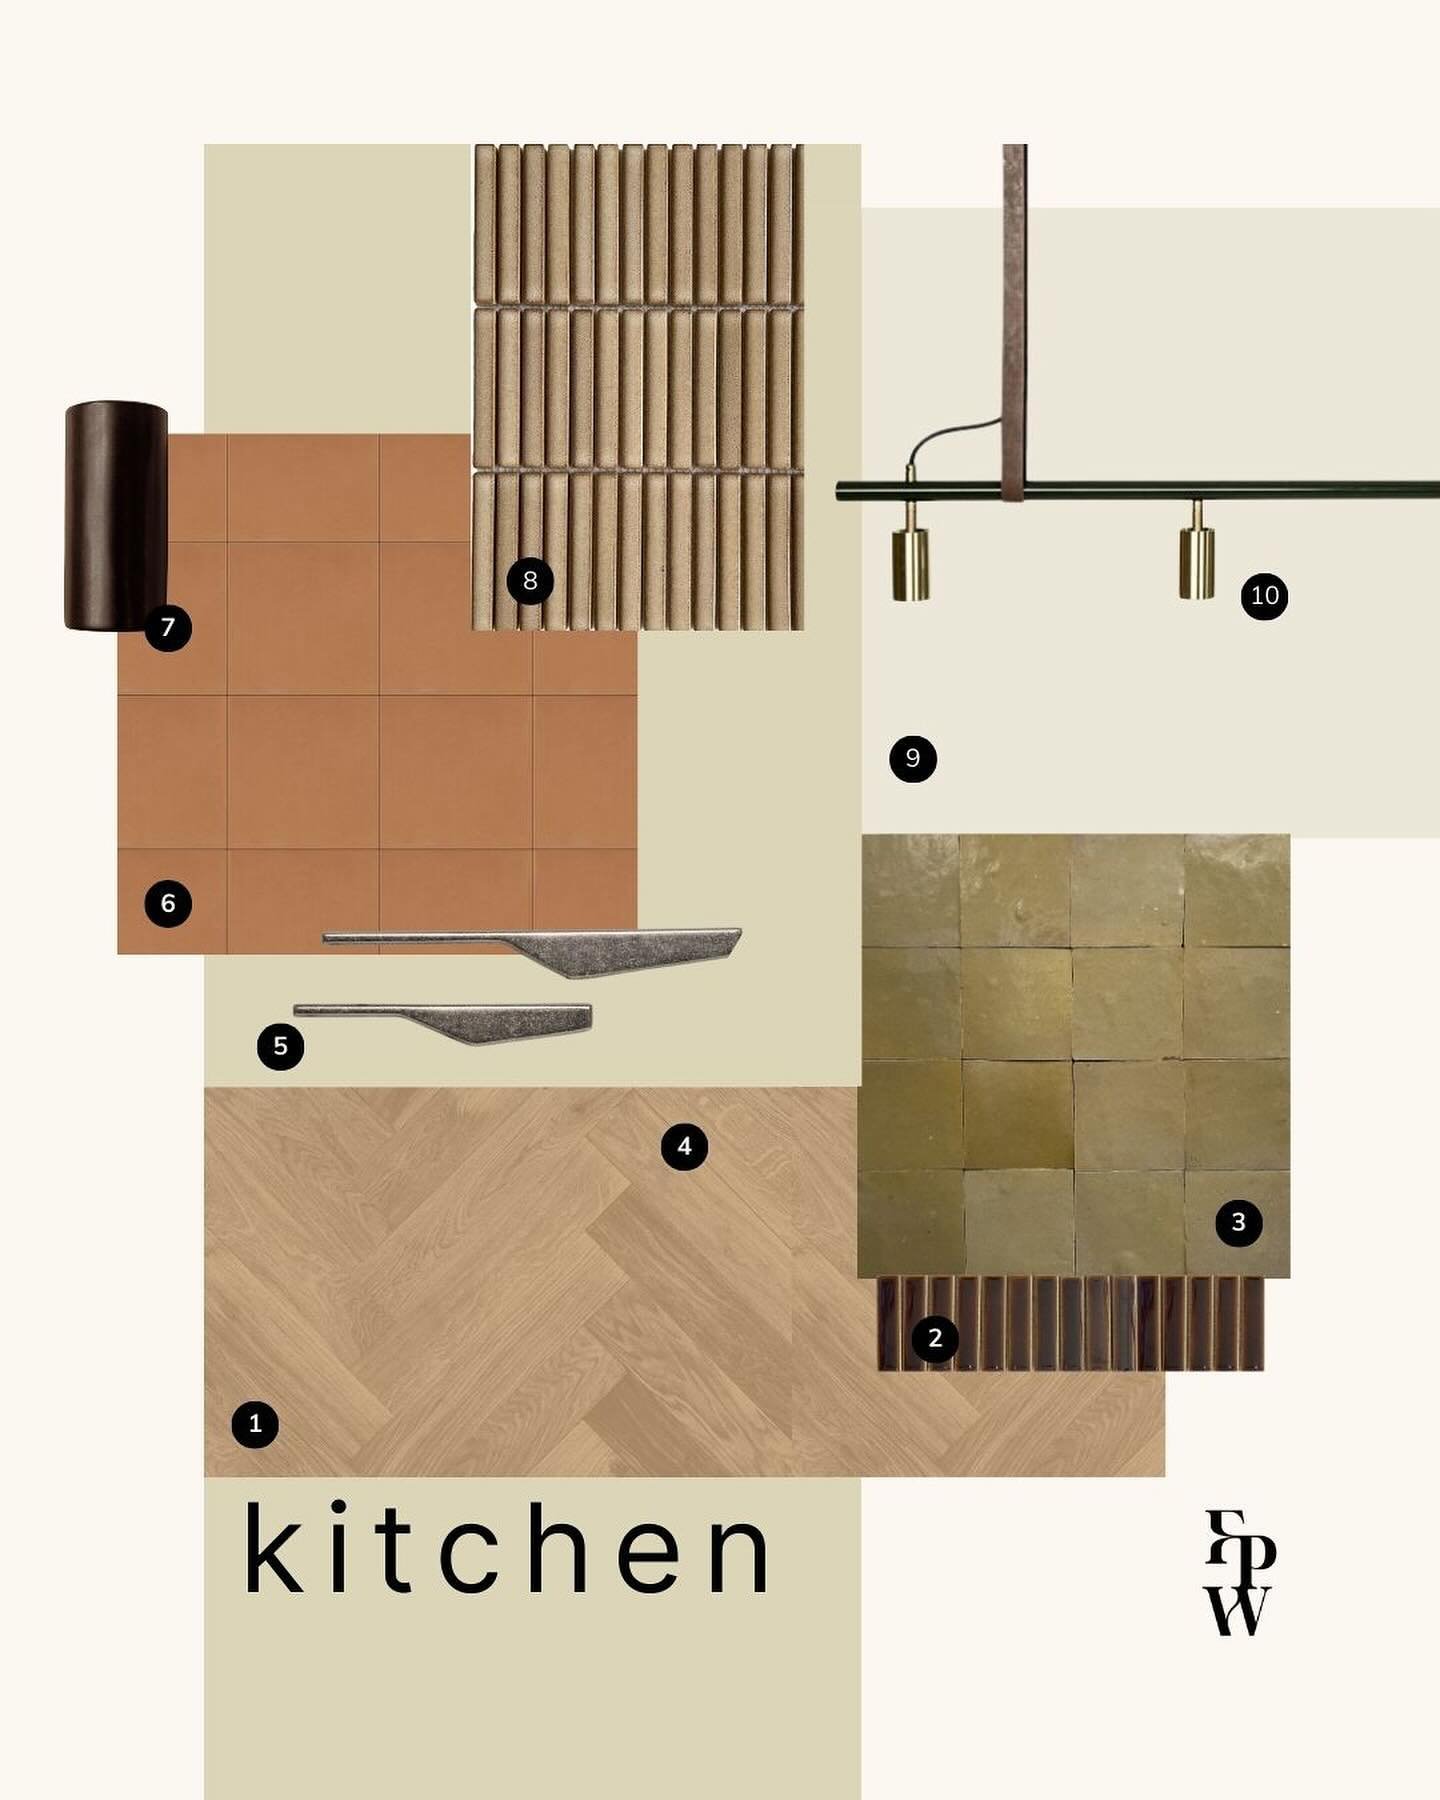 〰️ ASH 〰️ Kitchen Concept 〰️ Inspired by the art of @ashholmesart and rich, striking details of of Uluṟu, this is really an early exploration into materiality and layering for my @tafensw project. 

🟠 Work by both @folk.studio___ and @grtarchitects 